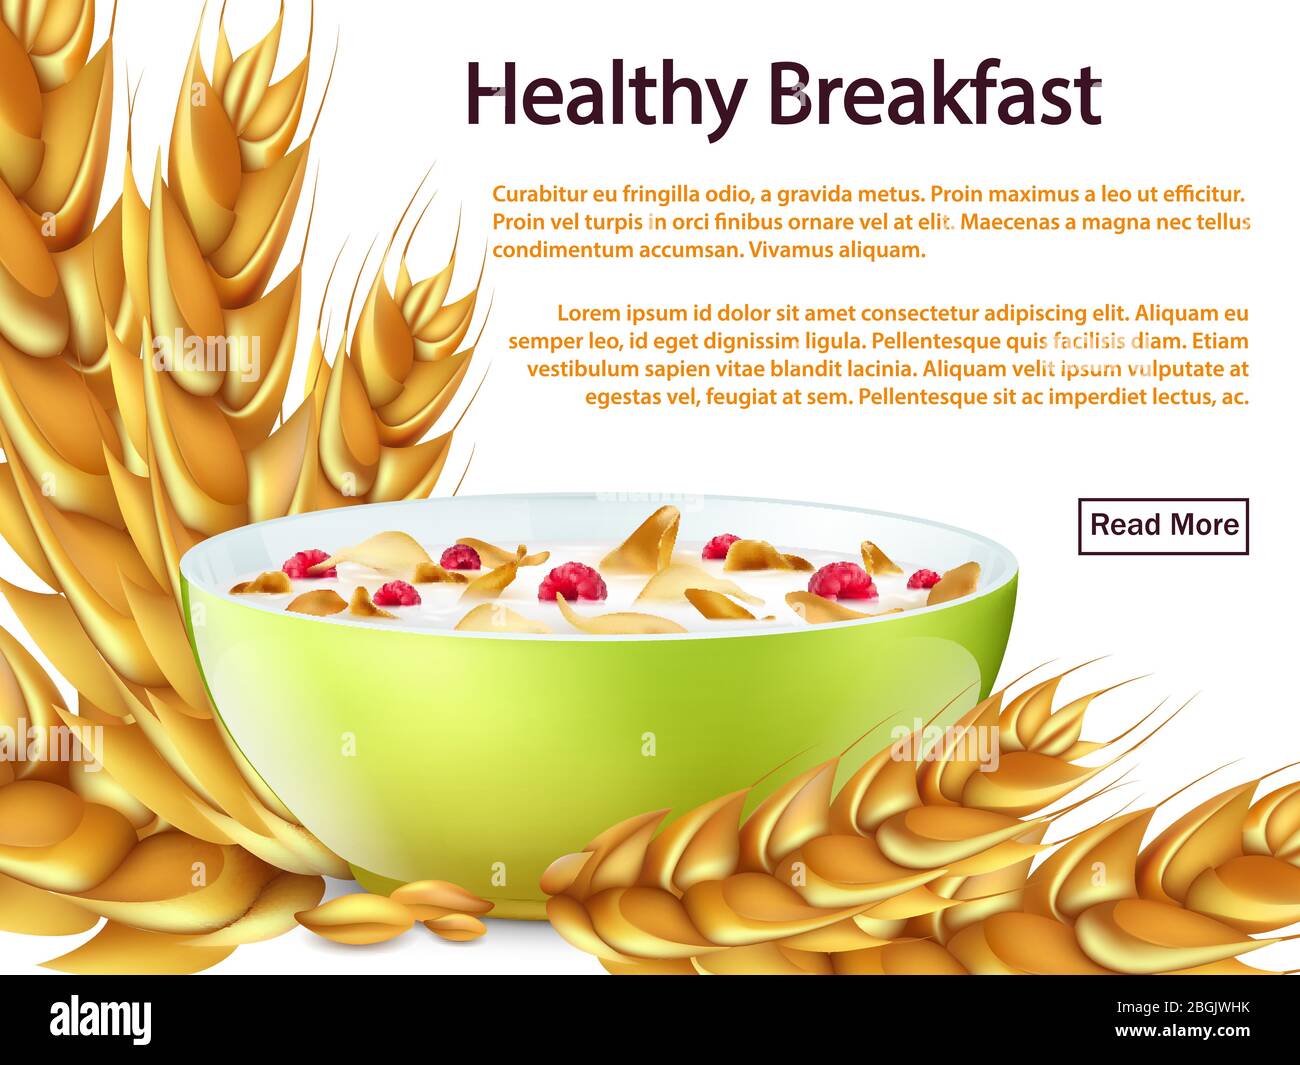 Healthy breakfast banner or background or web page vector concept with realstic objects - bowl, cereals, cornflakes illustration Stock Vector